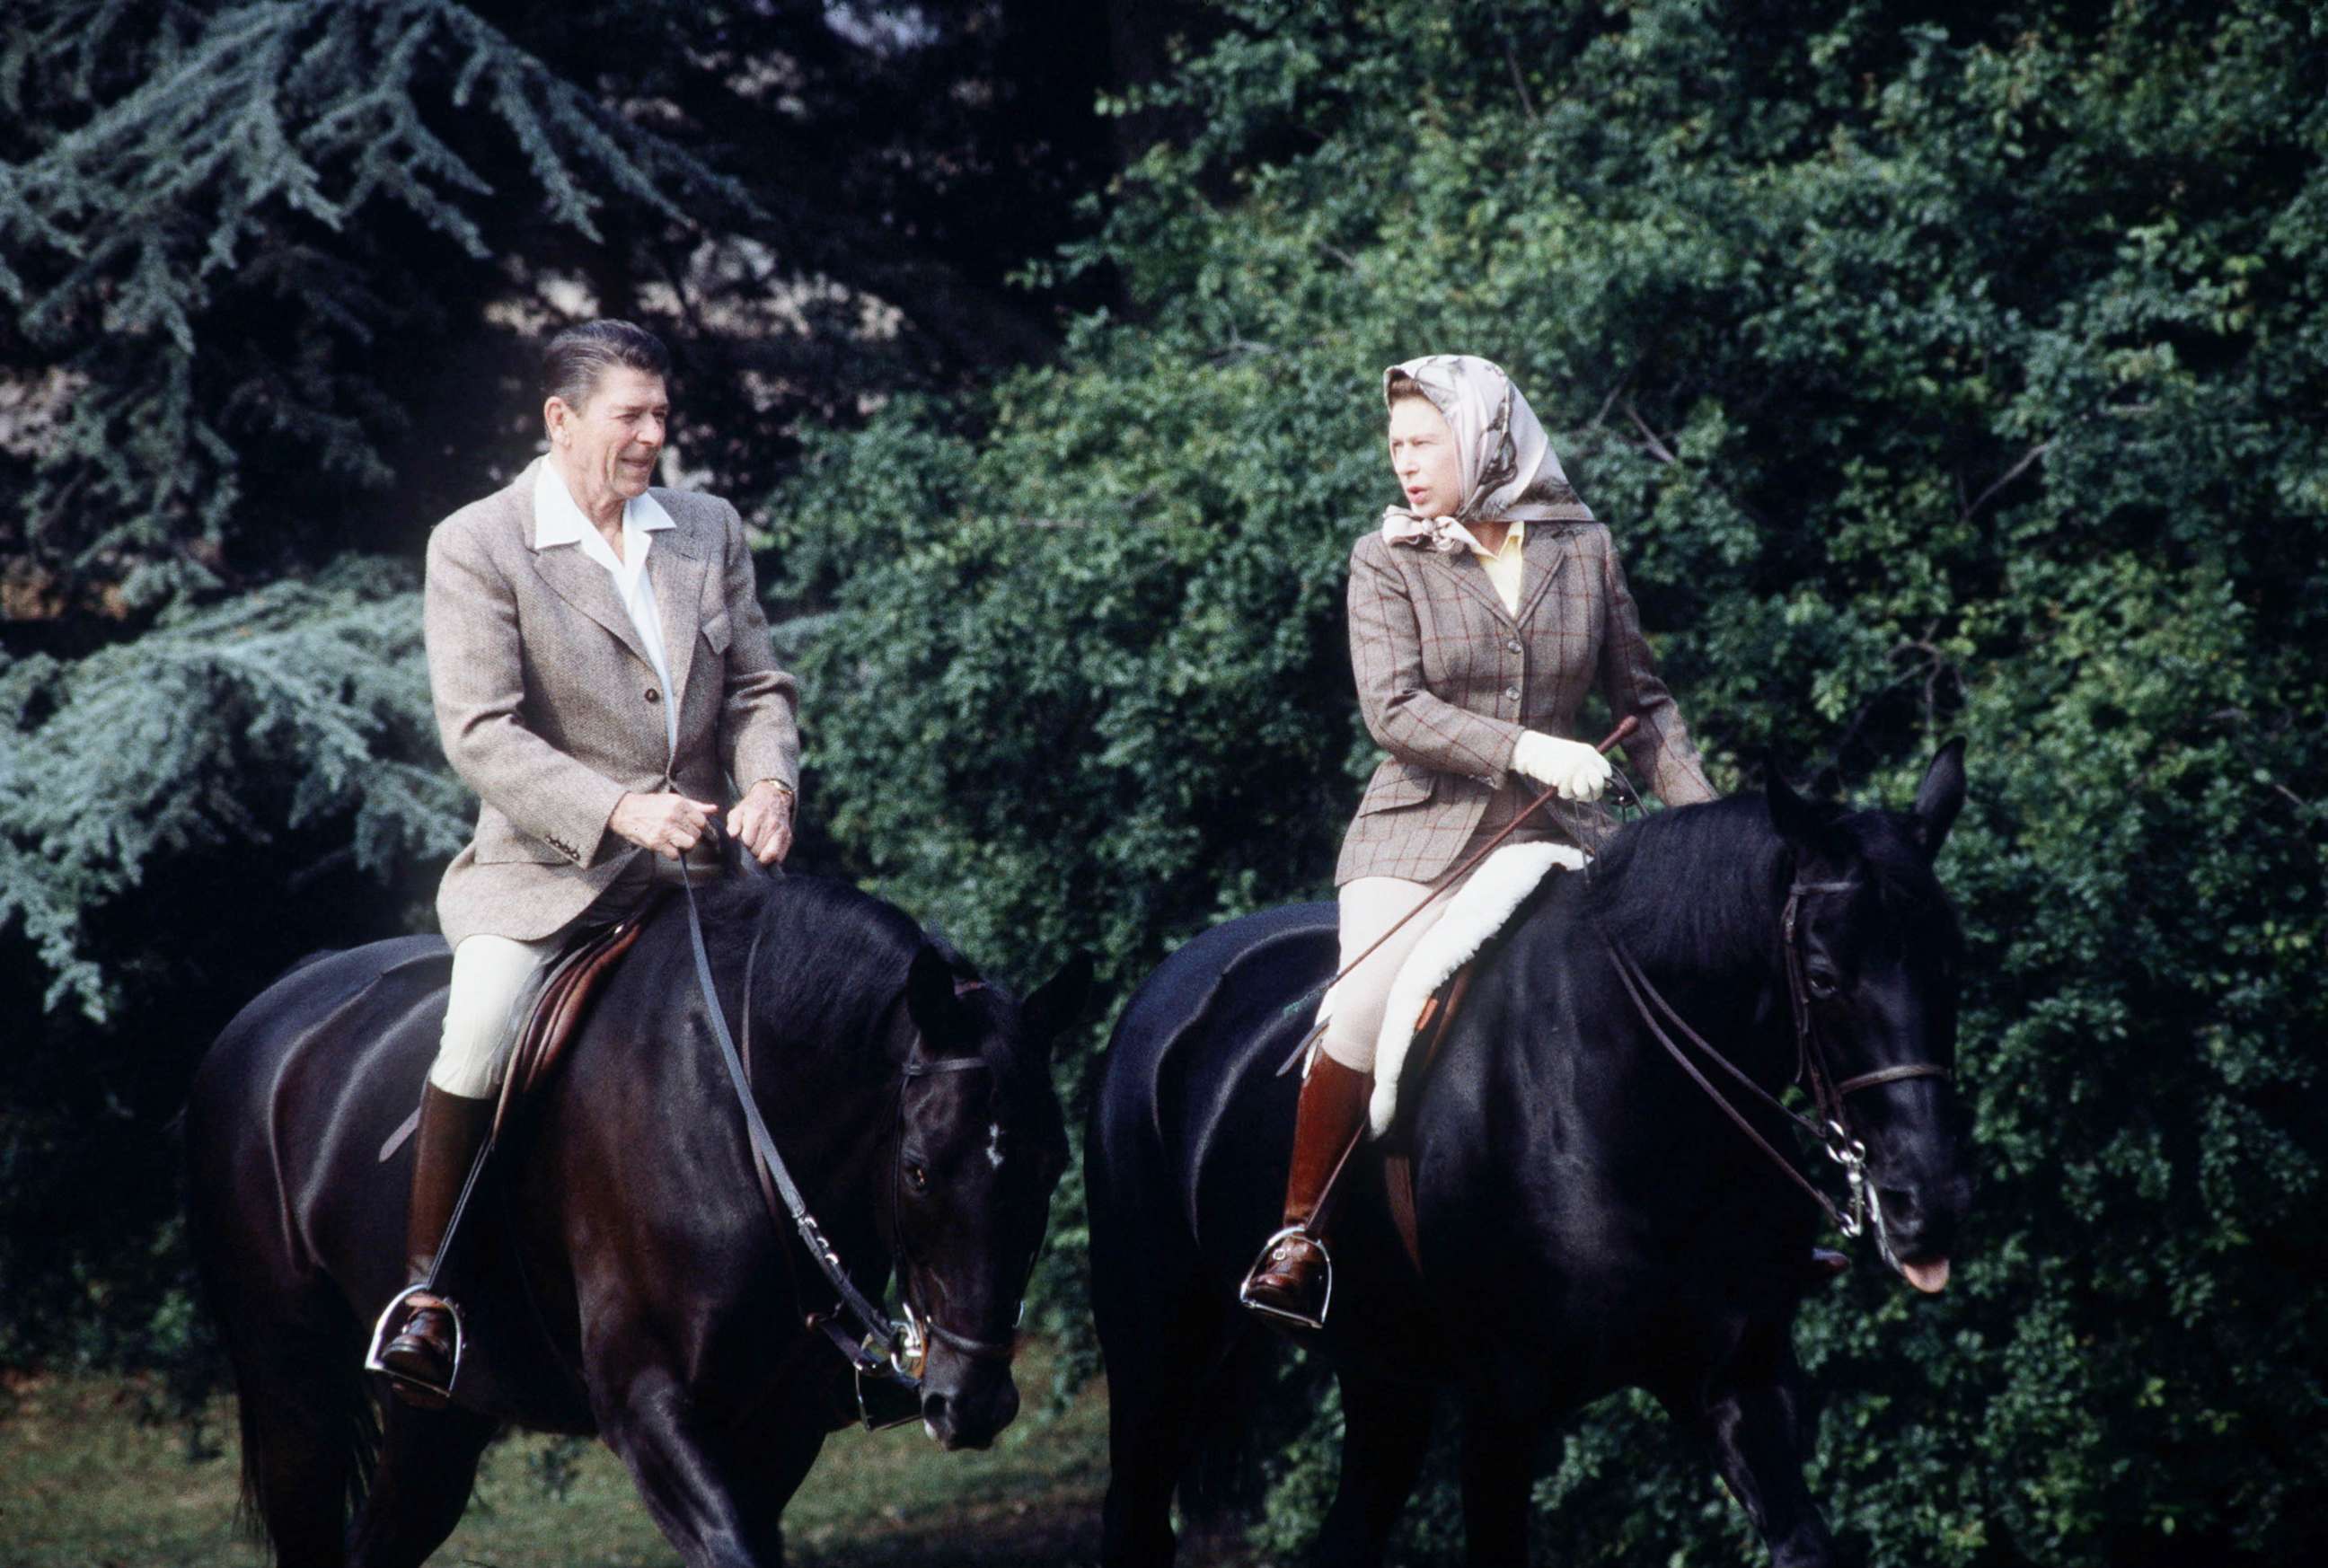 PHOTO: The queen rides with President Ronald Reagan on the grounds of Windsor Castle during his state visit on June 8, 1982.